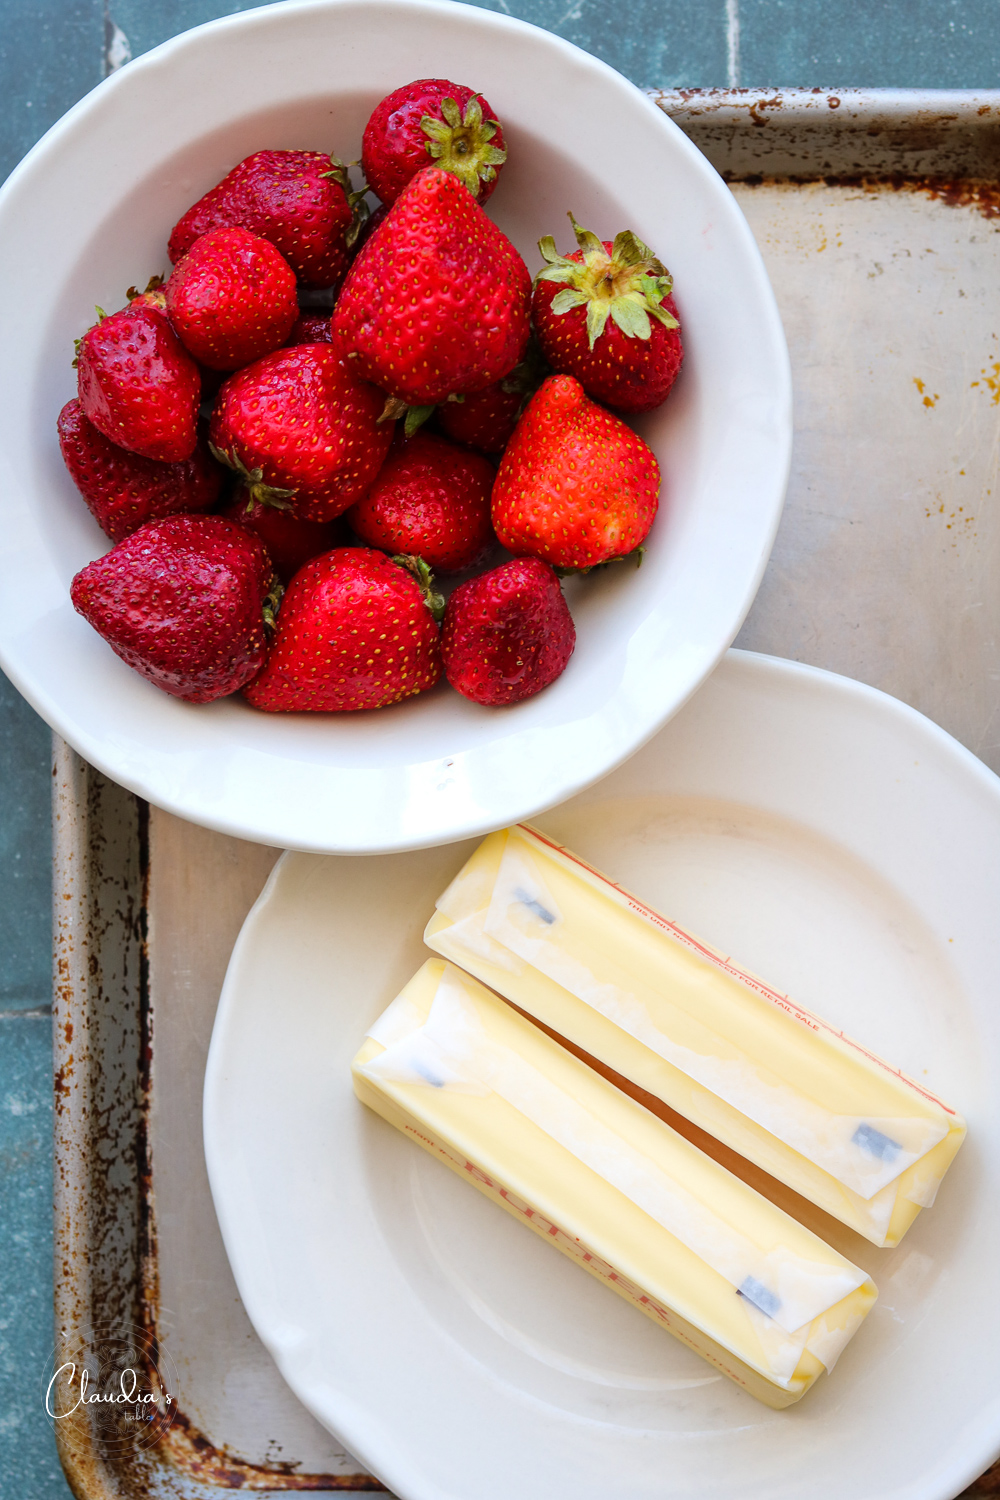 Ripe strawberries and unsalted butter